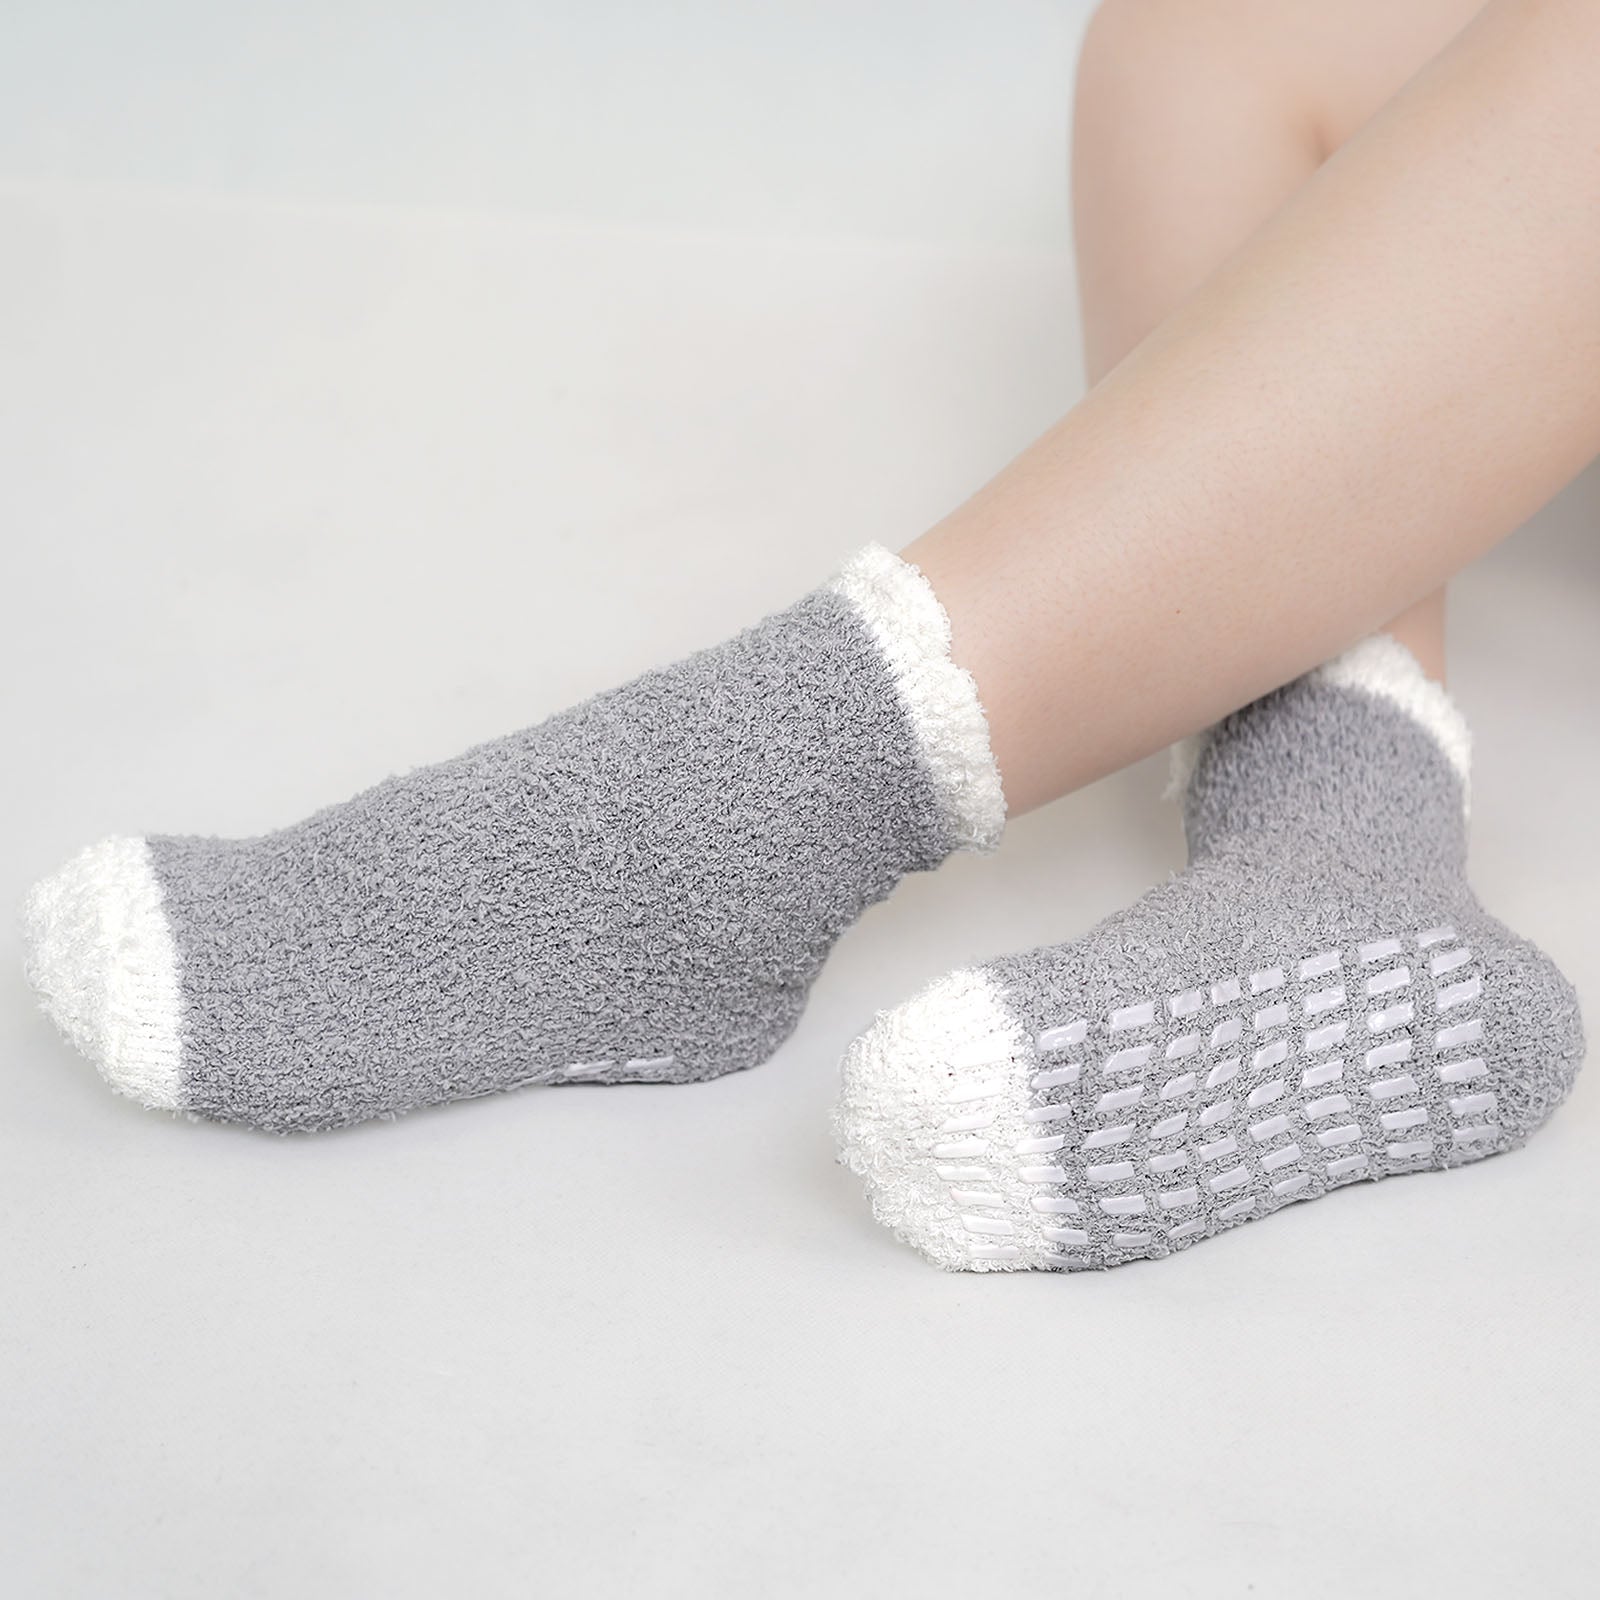 Springcorner 5 Pairs Fuzzy Socks for Women, Non Slip Fluffy Soft Warm Cozy  Crew Socks with Grips for Winter, Soft Thermal Fuzzy Socks for Home